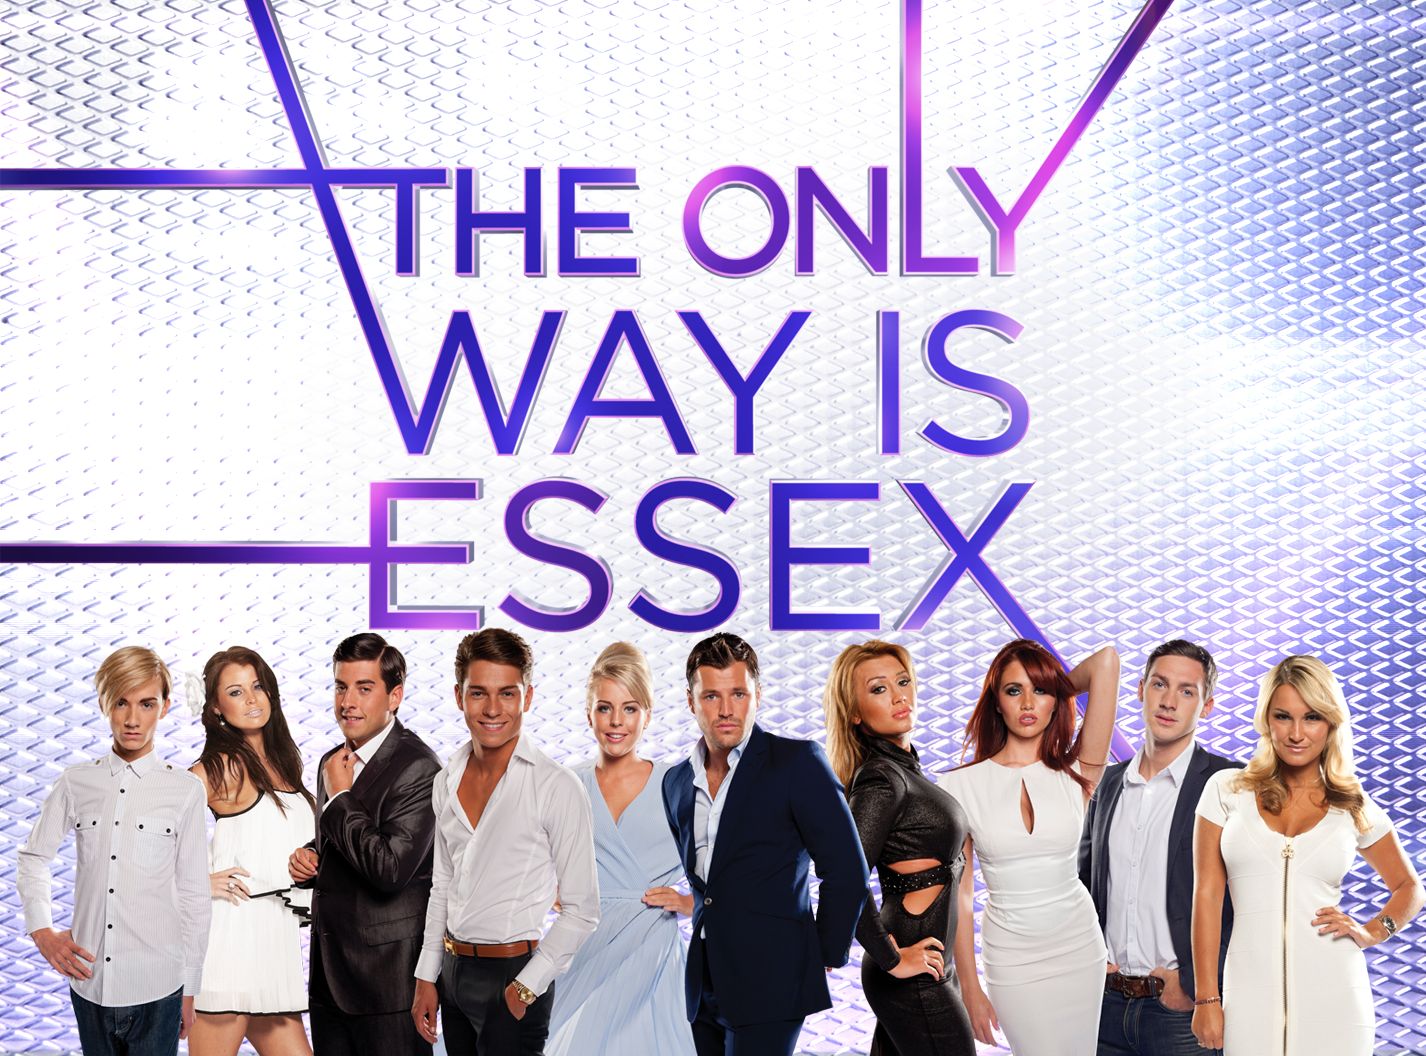 The only way is up. The only way is Essex TV Spoilers. The only way is Essex Series Finale Spoilers. The only way we